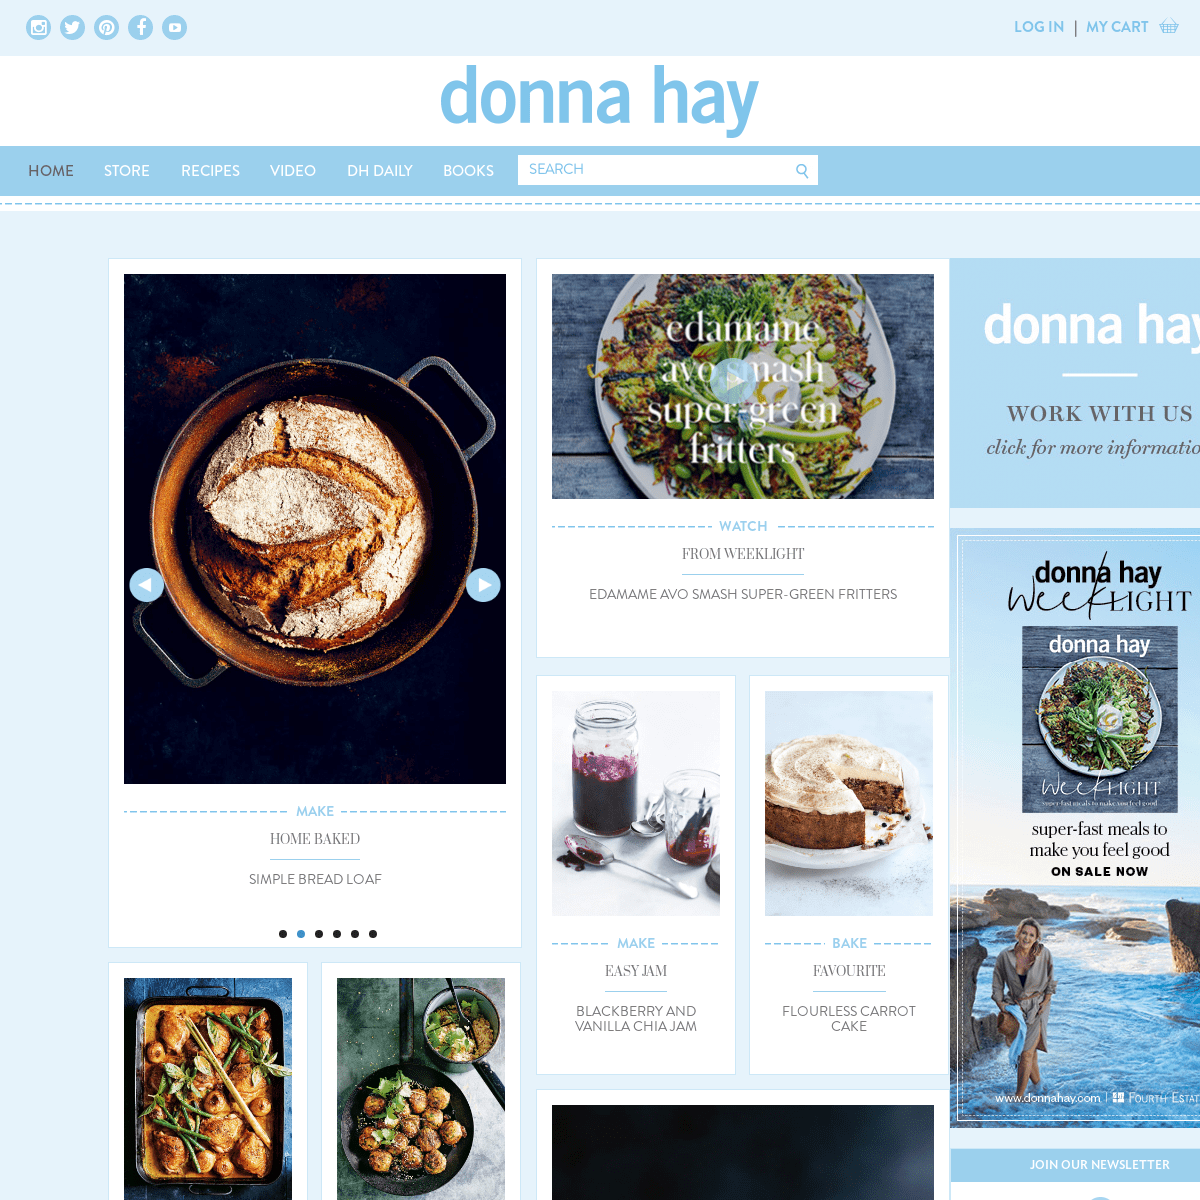 A complete backup of donnahay.com.au